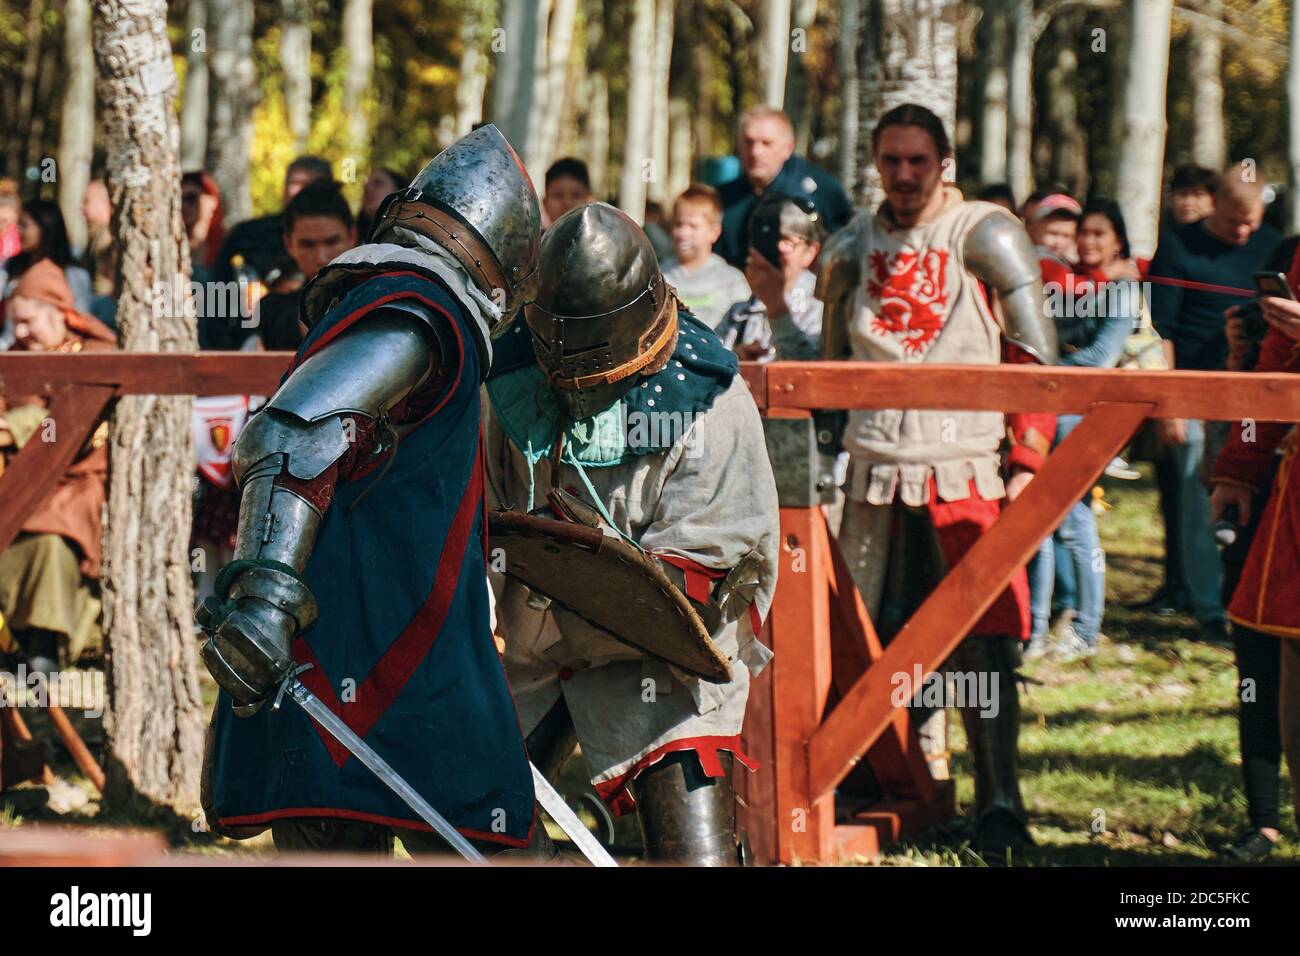 5 Ways To Get Through To Your jousting costume